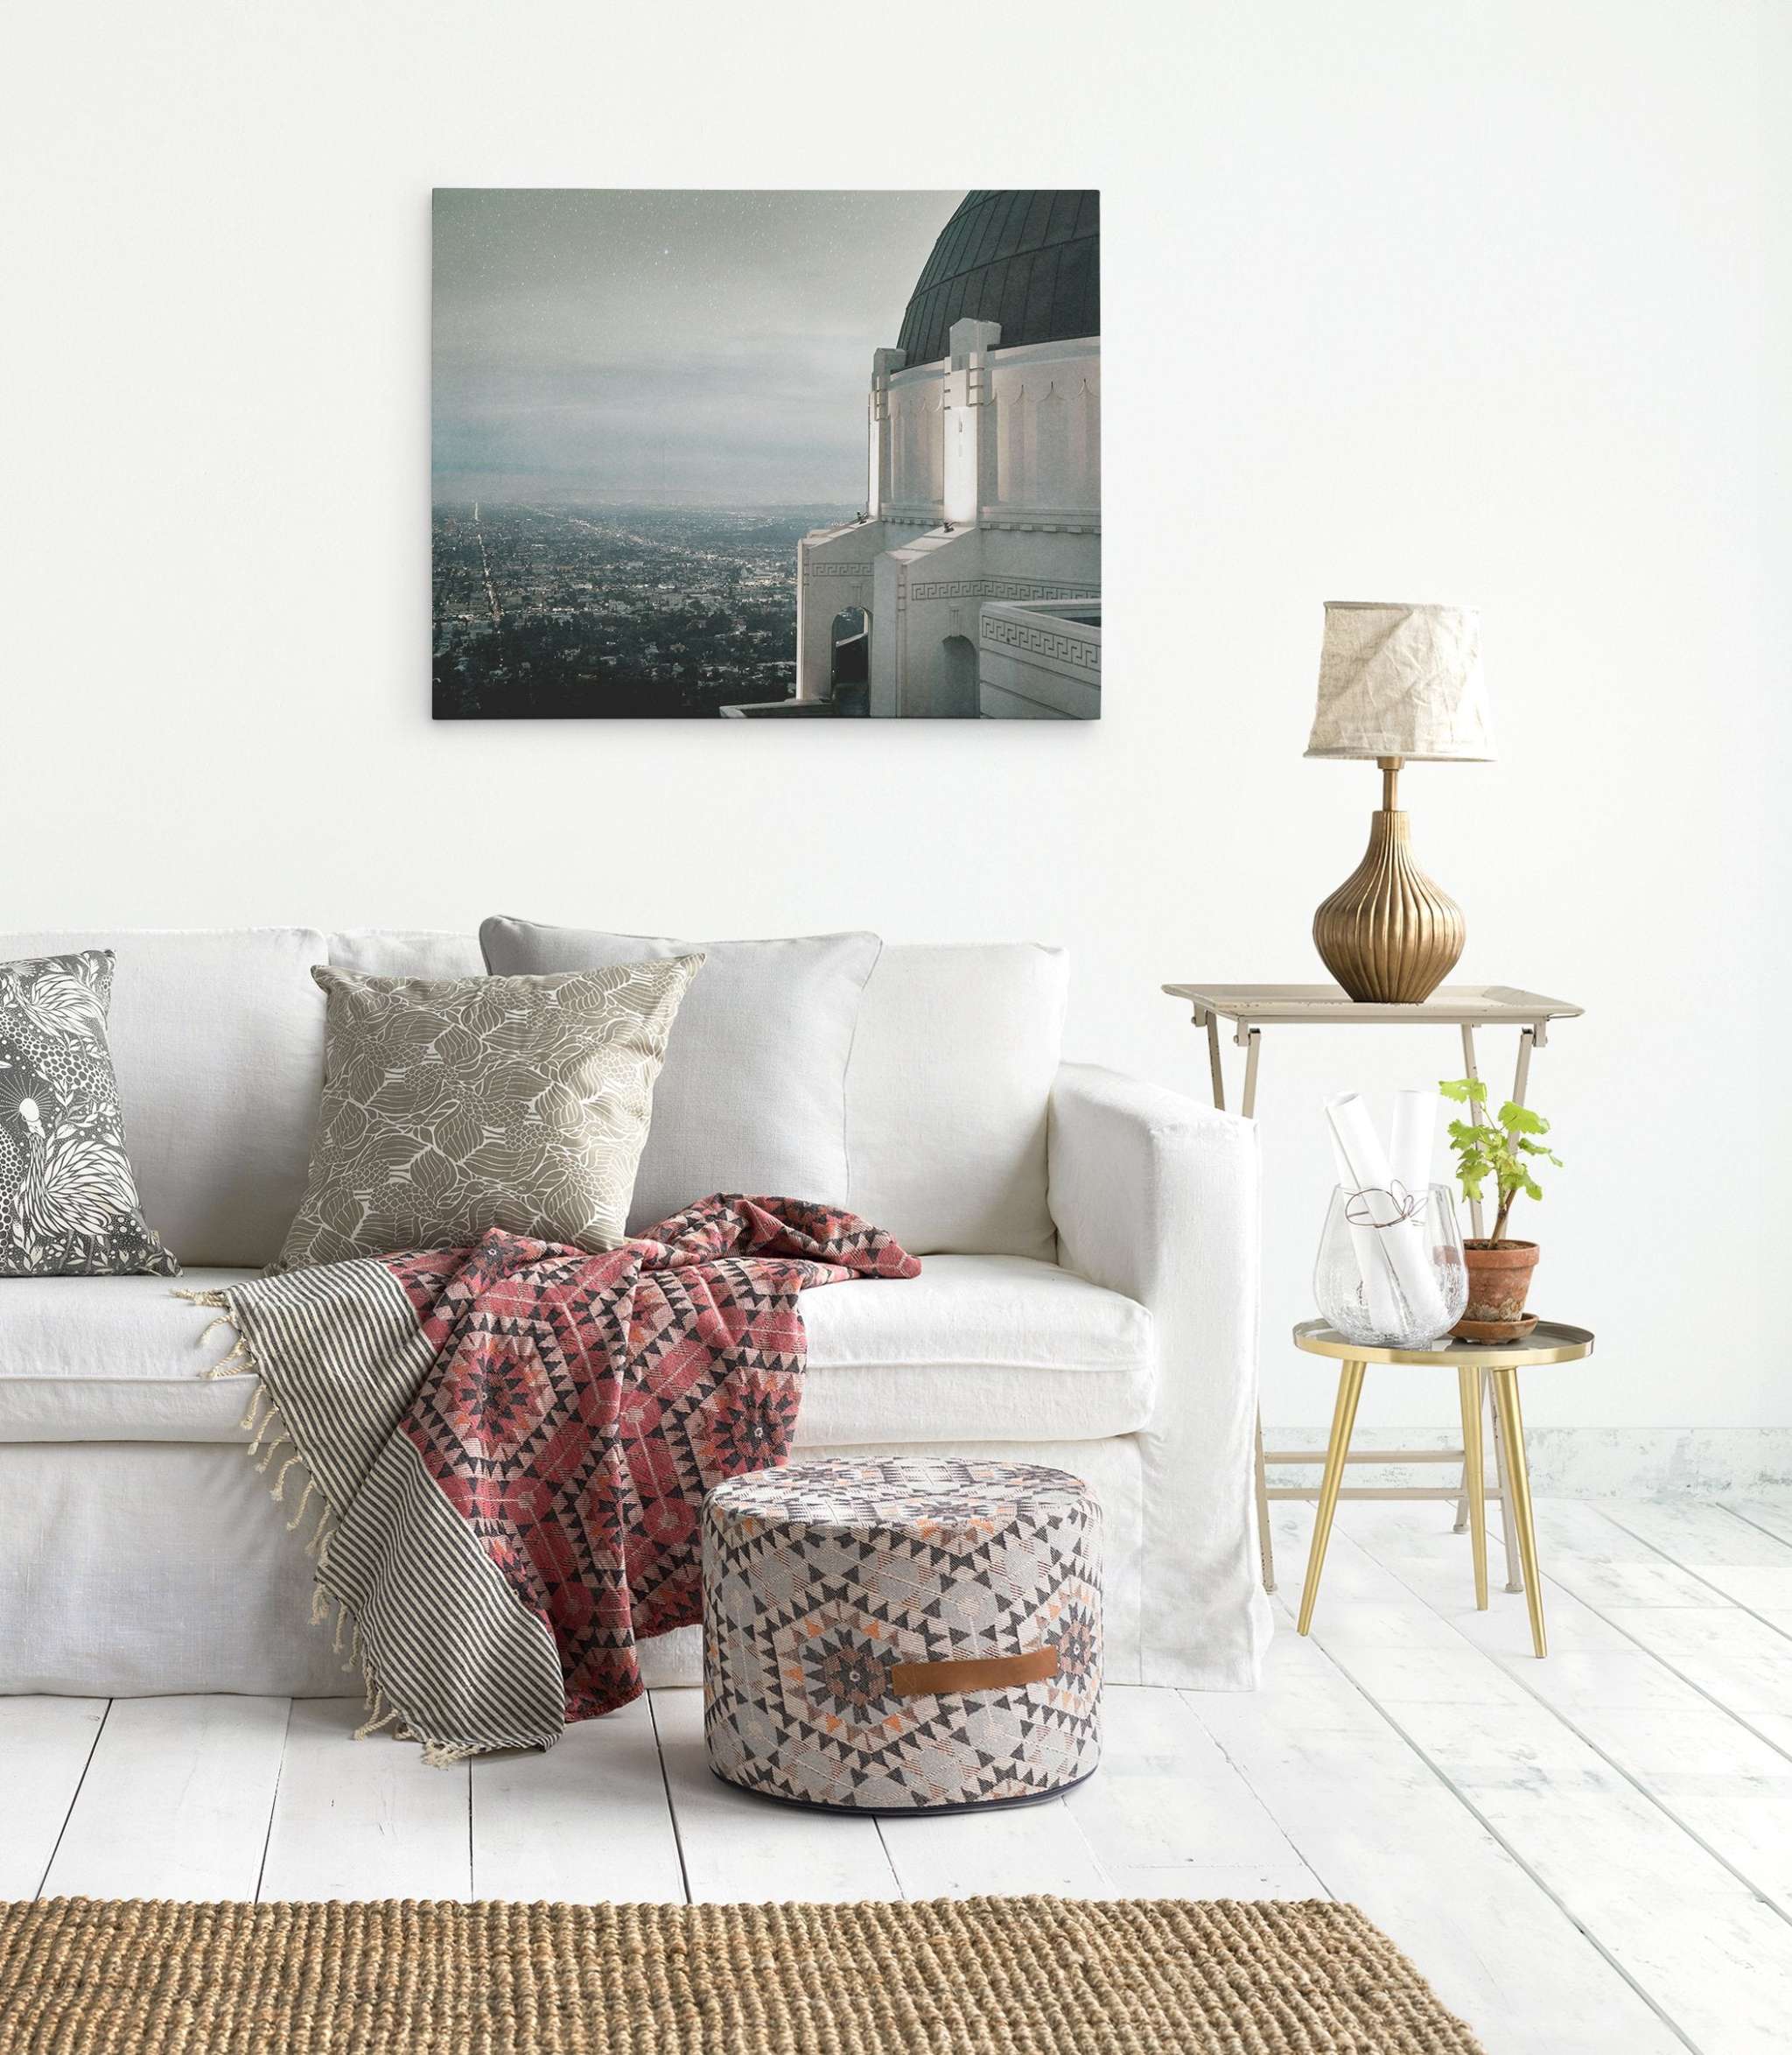 A modern living room features a white sofa adorned with patterned cushions and a red geometric throw blanket. A small gray ottoman and a side table with a gold lamp, glass vase, and plant are nearby. Los Angeles Griffith Observatory Canvas Wall Decor, 'The Sky At Night' by Offley Green hangs on the white wall above the sofa.